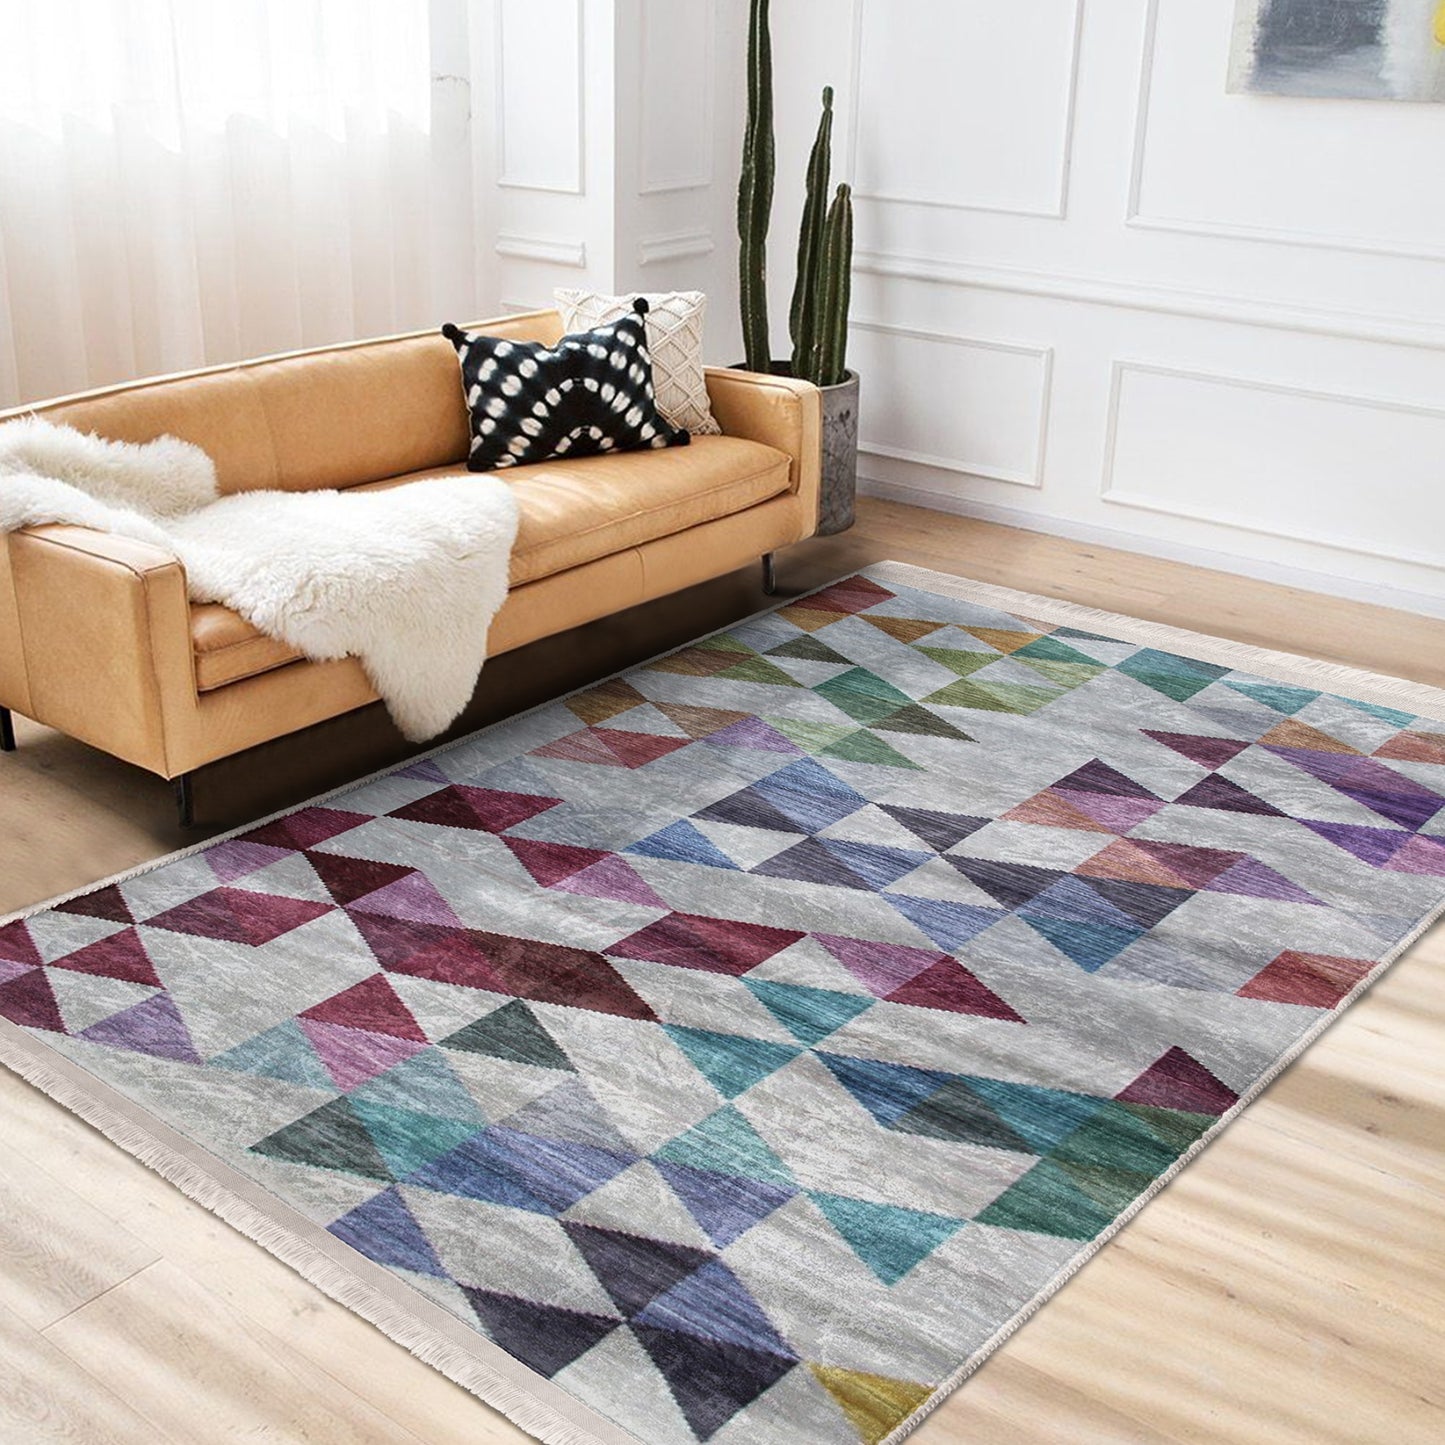 Geometric Patterned Area Rug for a Calming Interior